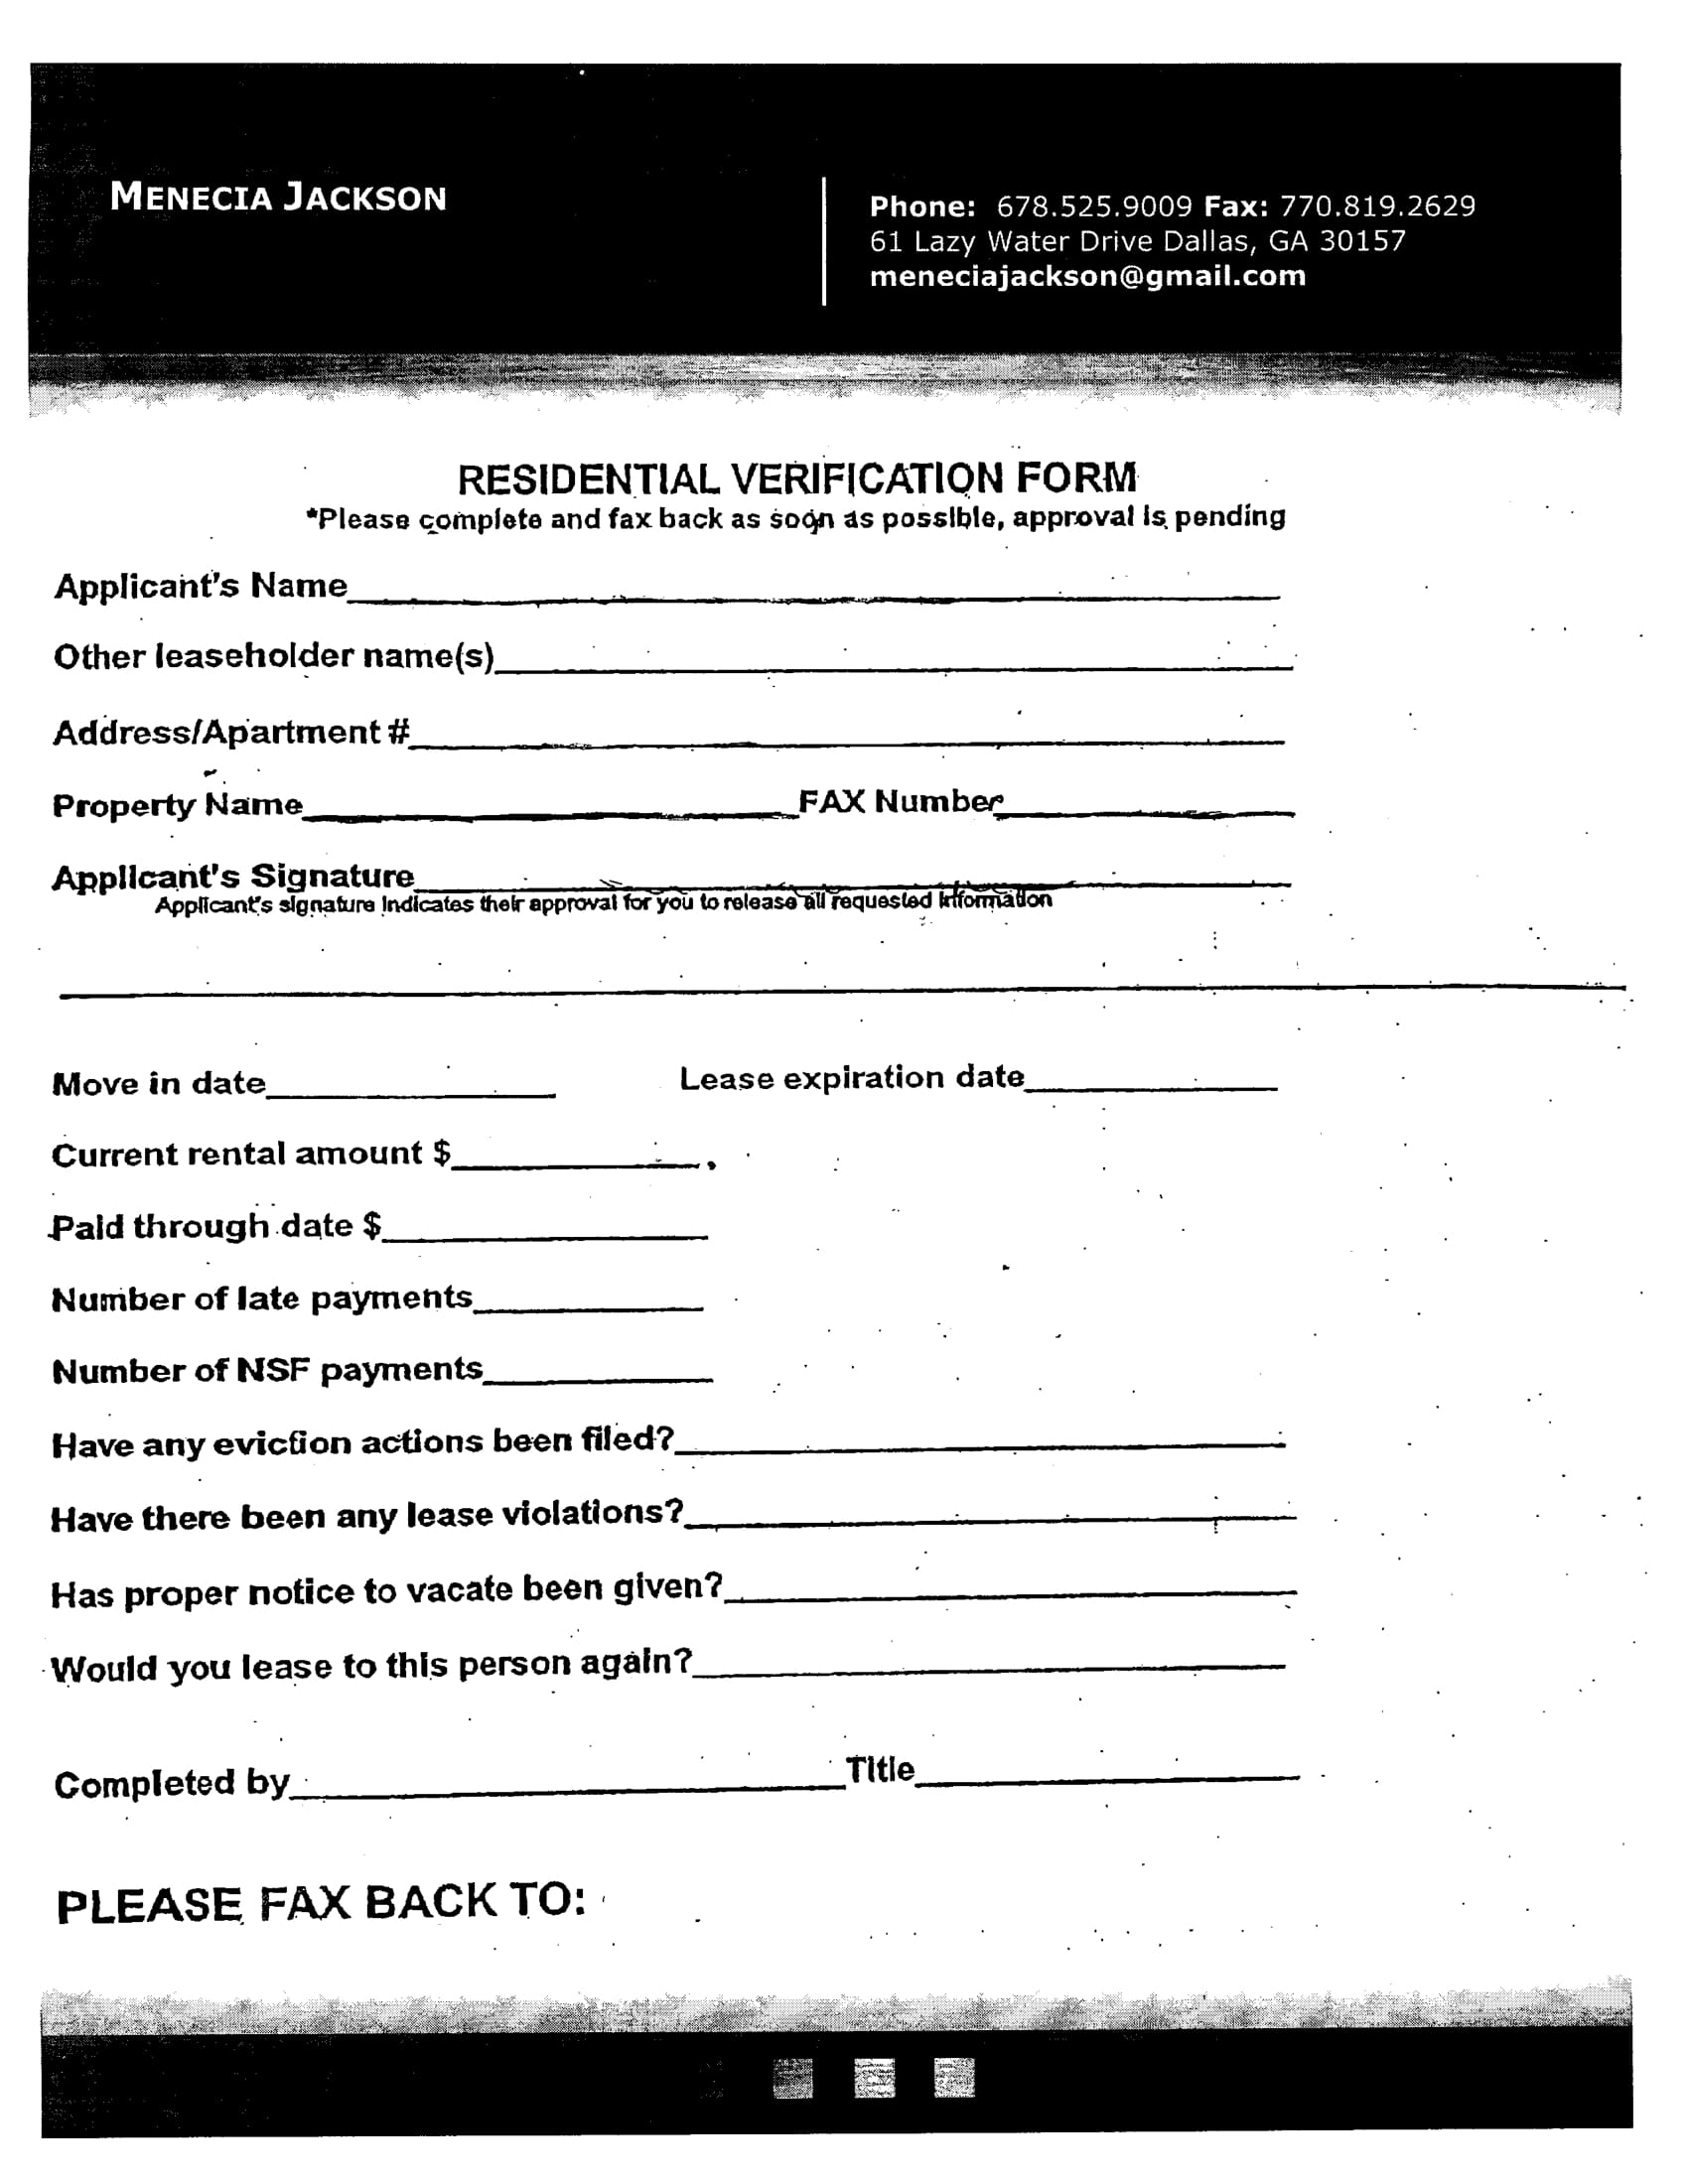 applicant residential verification form 1